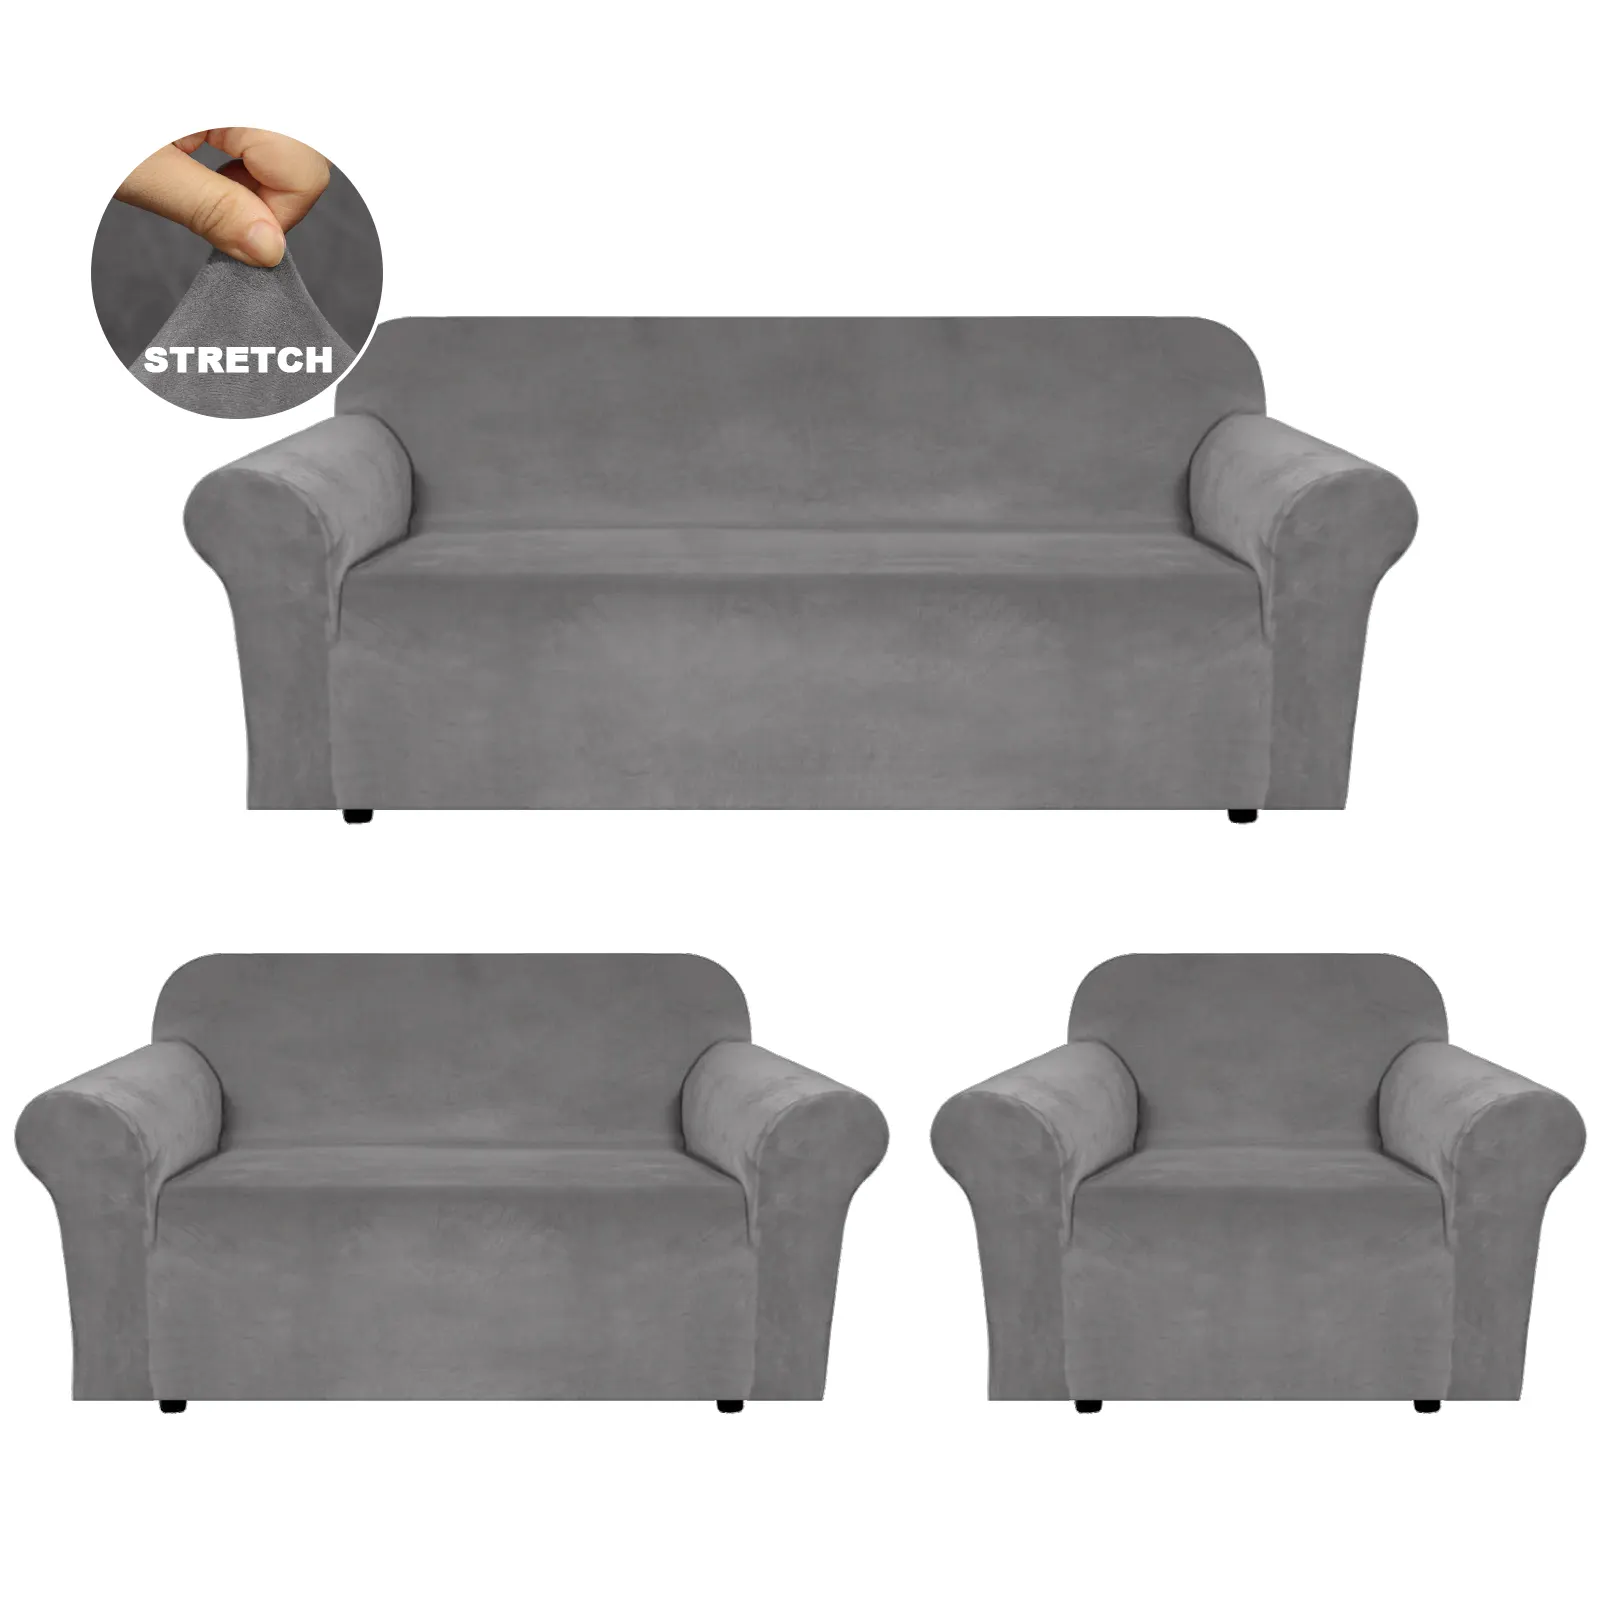 Luxury Velvet Stretchable Sofa Cover Living Room Sofa Cover 2 Seater Love Seat Size Grey Sofa Cover